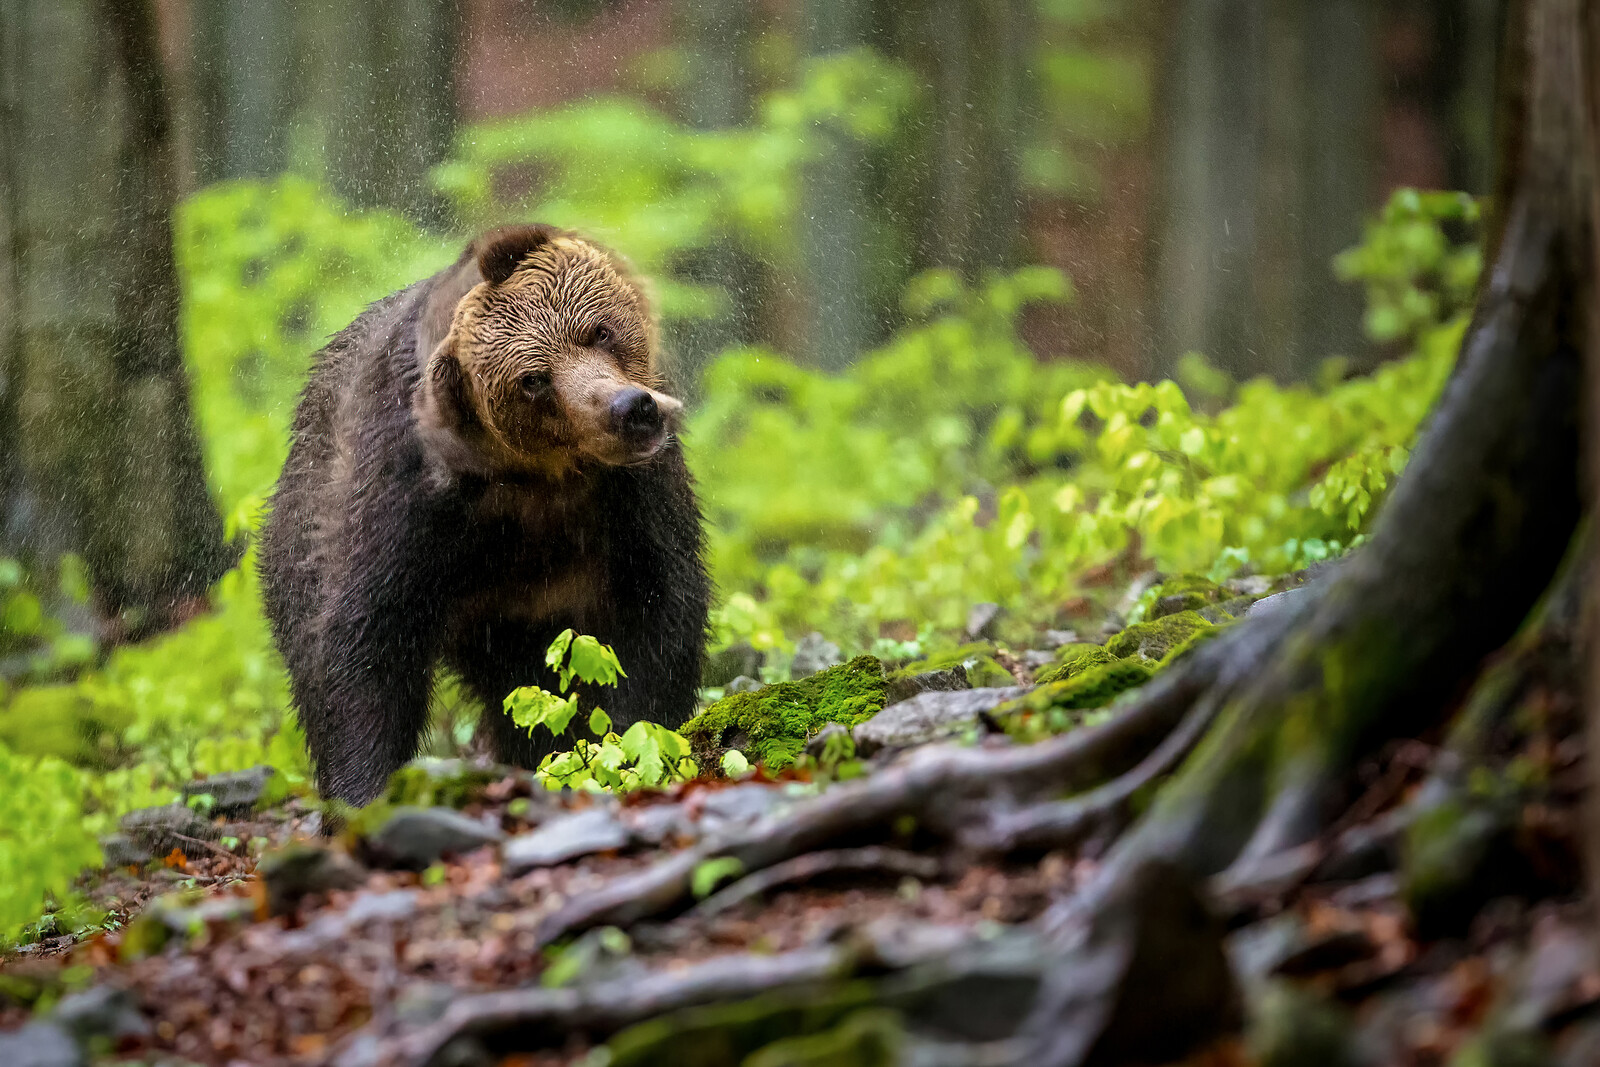 a photo of a bear shaking off water in a forest